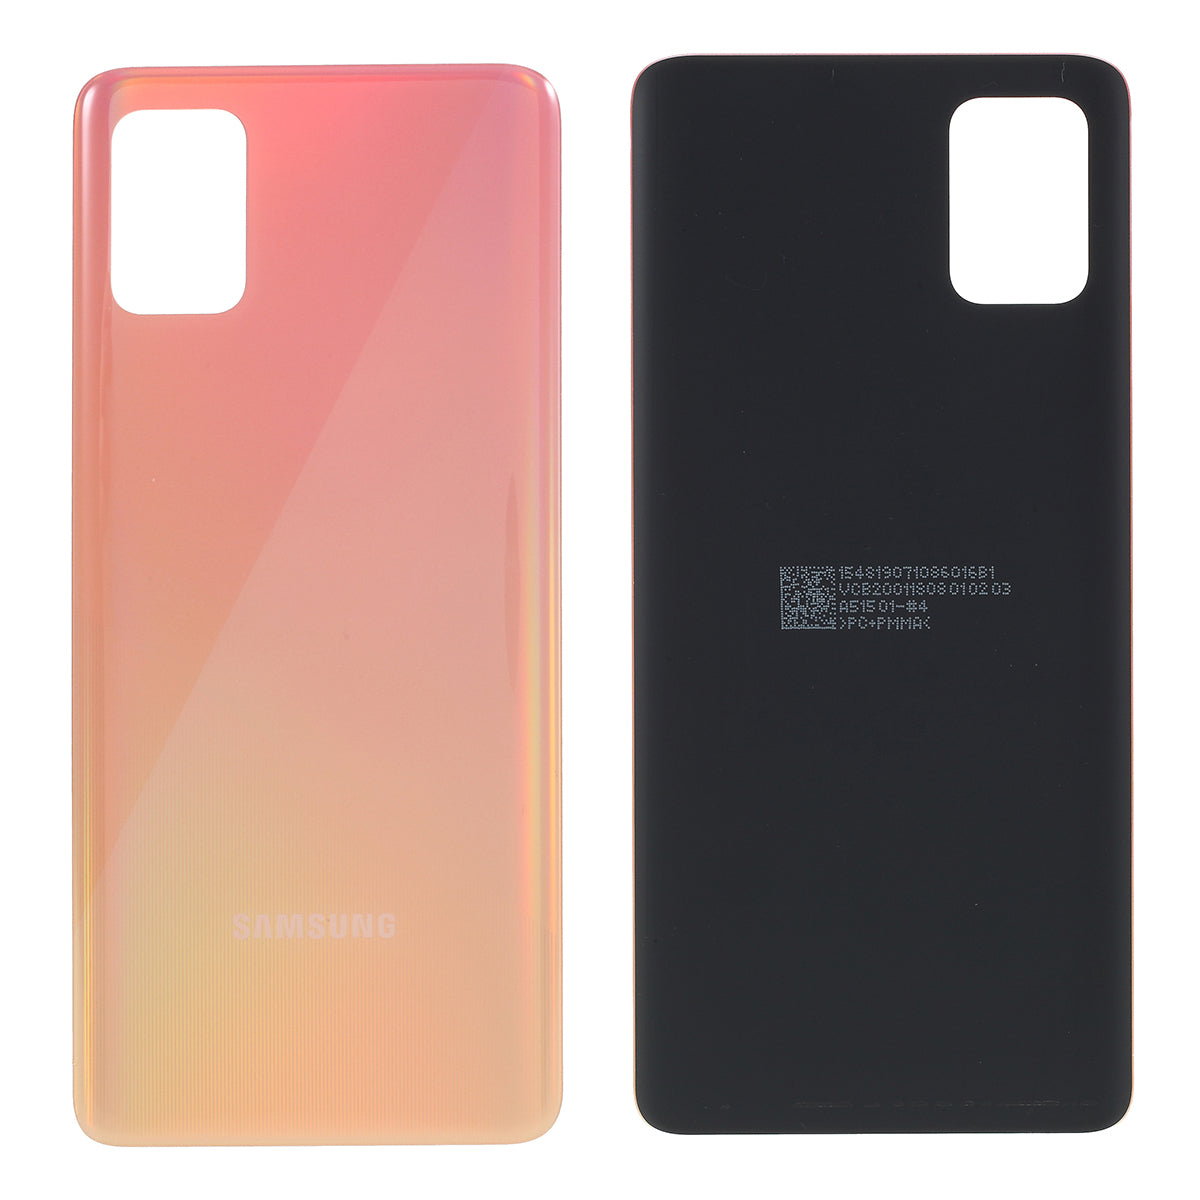 OEM for Samsung Galaxy A51 A515 Back Battery Housing without Adhesive Sticker - Pink